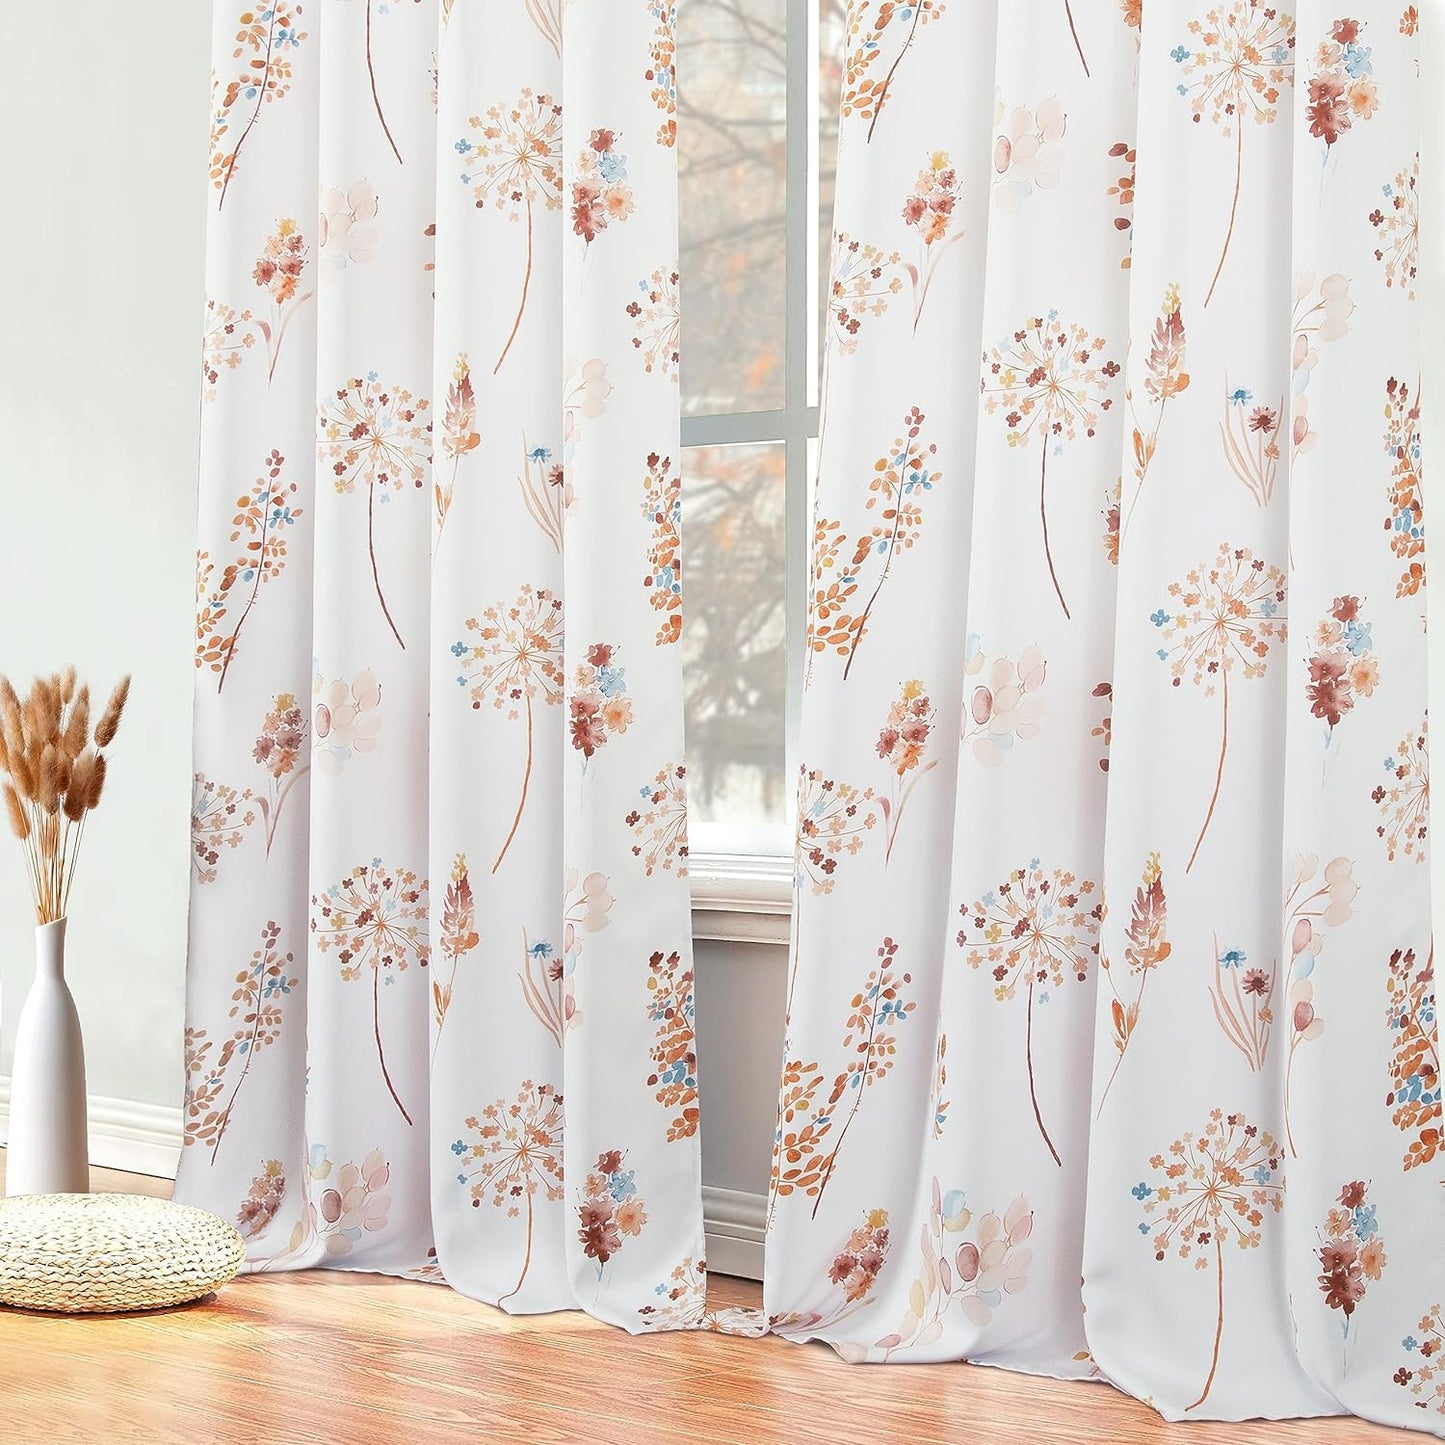 XTMYI 63 Inch Length Sage Green Window Curtains for Bedroom 2 Panels,Room Darkening Watercolor Floral Leaves 80% Blackout Flowered Printed Curtains for Living Room with Grommet,1 Pair Set  XTMYI Orange  Blue 52"X84" 